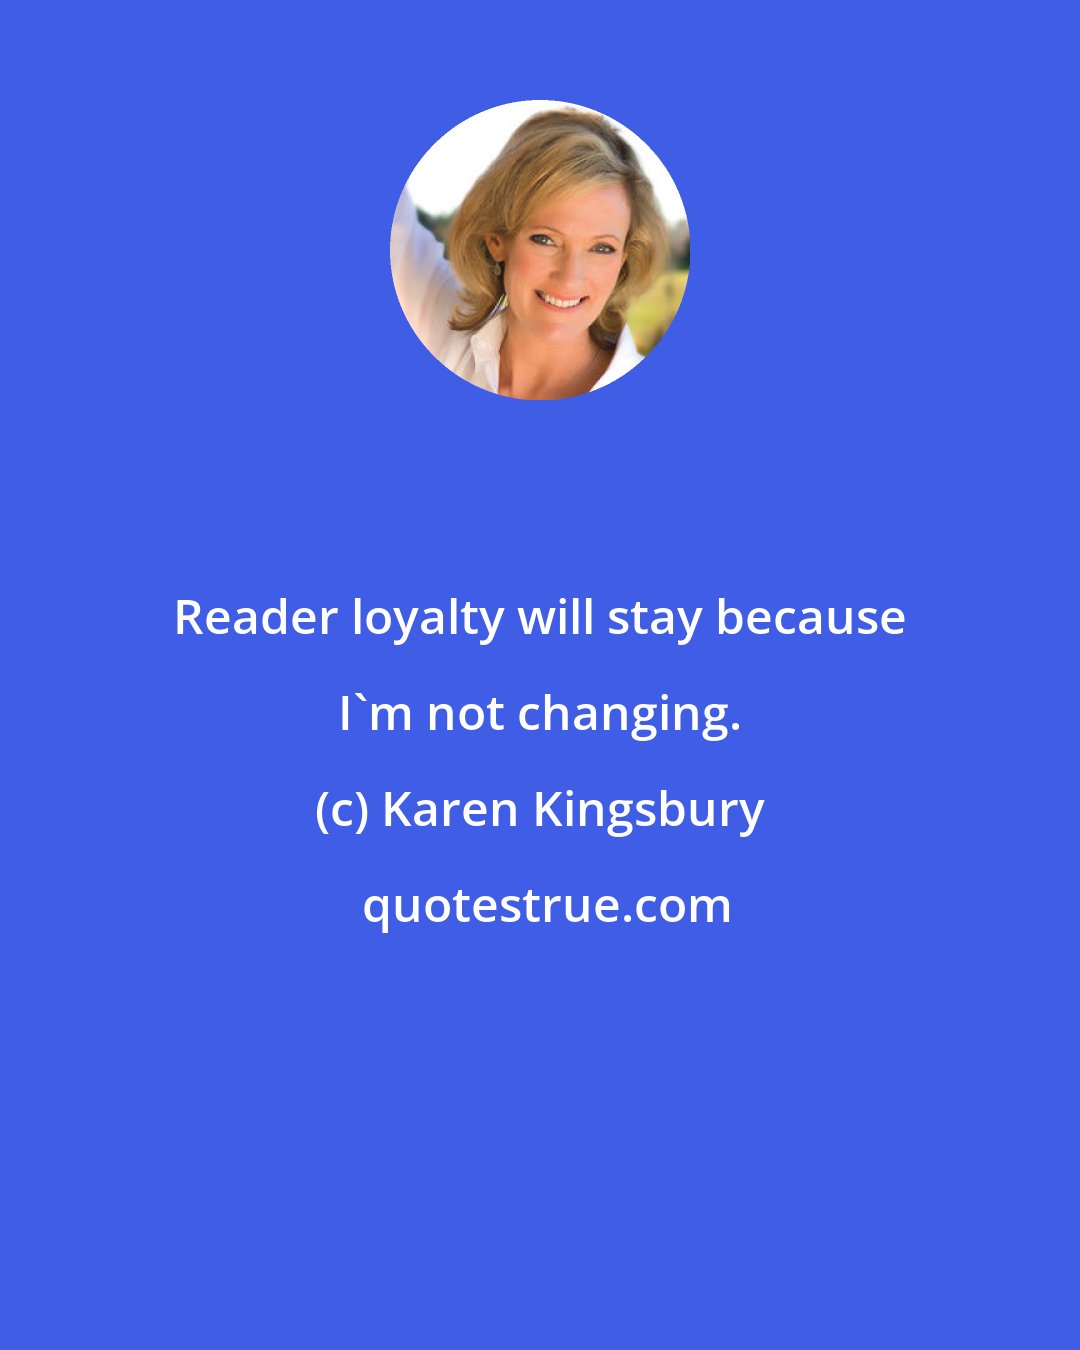 Karen Kingsbury: Reader loyalty will stay because I'm not changing.